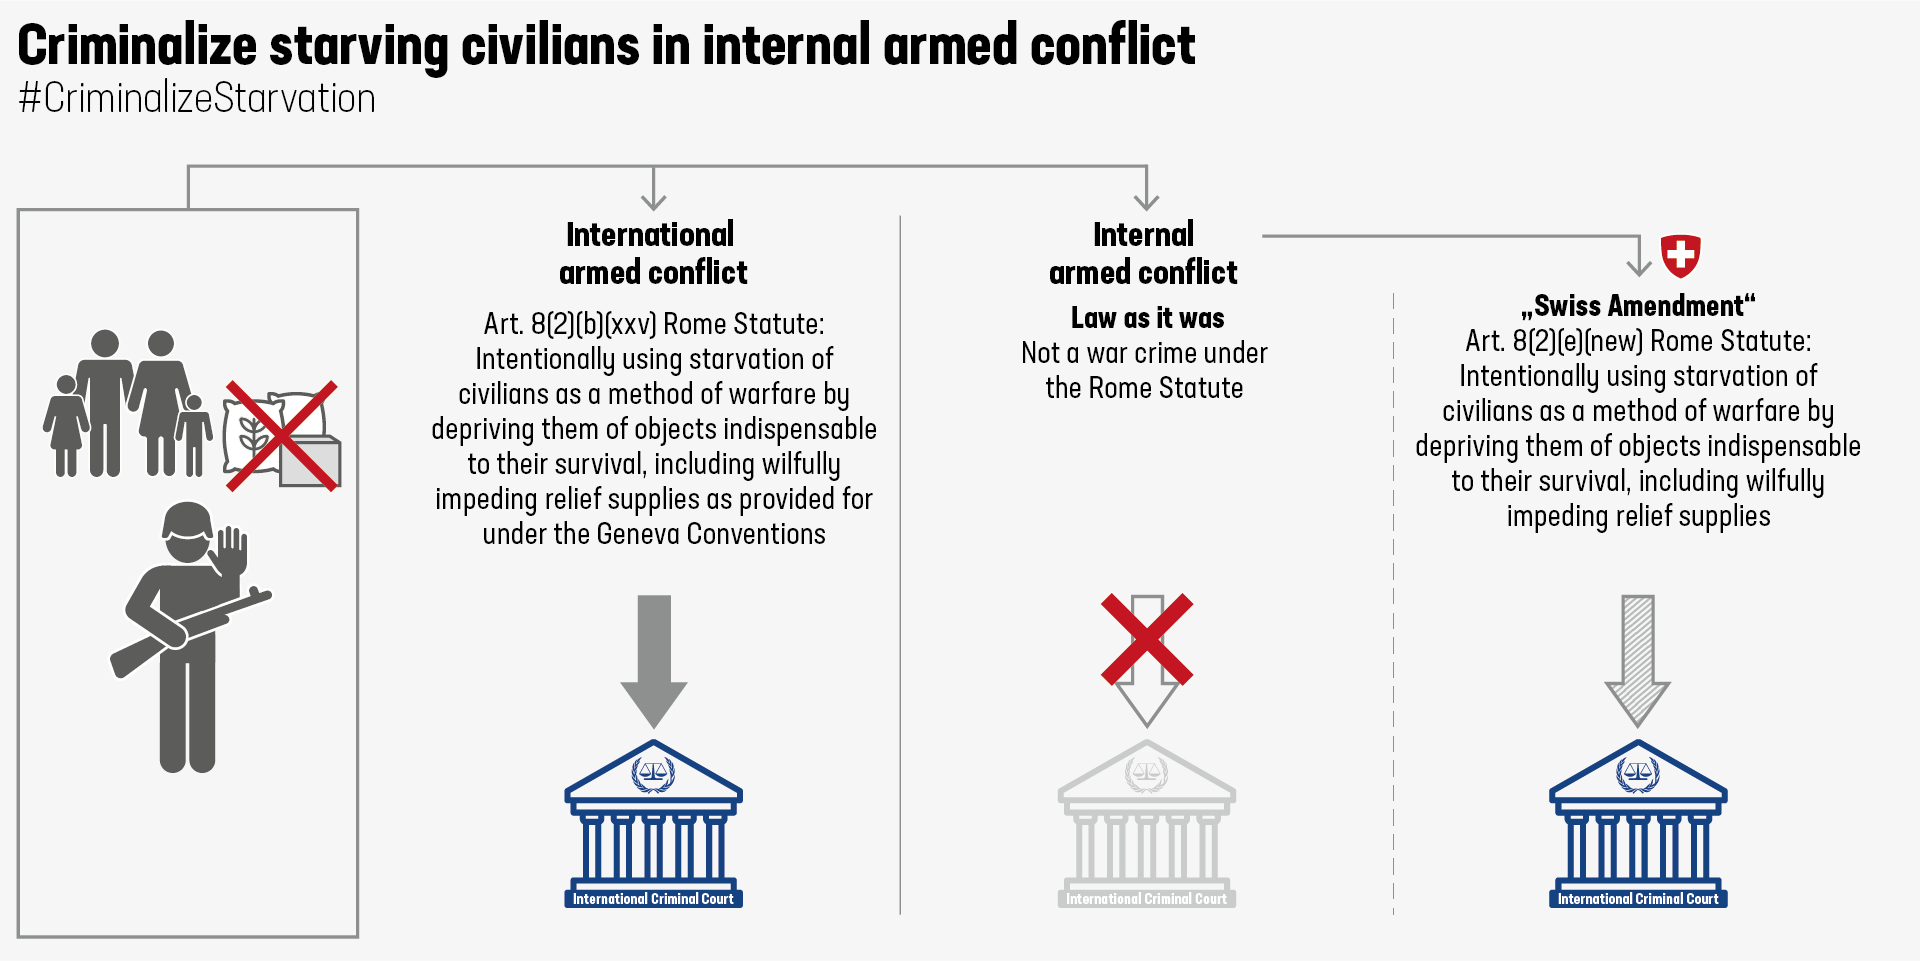 Chart outlining the amendment to the Rome Statute of the International Criminal Court.